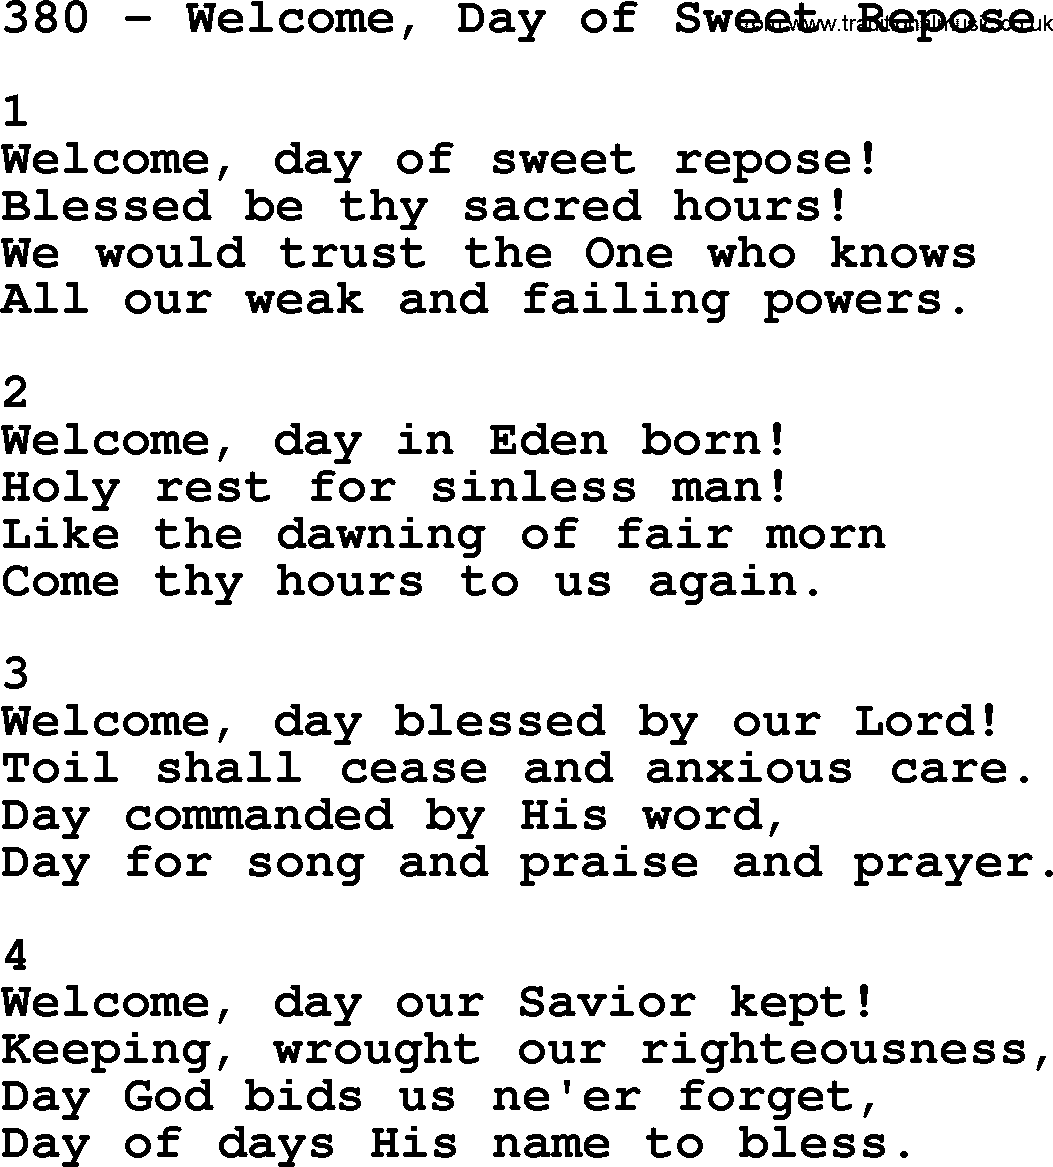 Complete Adventis Hymnal, title: 380-Welcome, Day Of Sweet Repose, with lyrics, midi, mp3, powerpoints(PPT) and PDF,